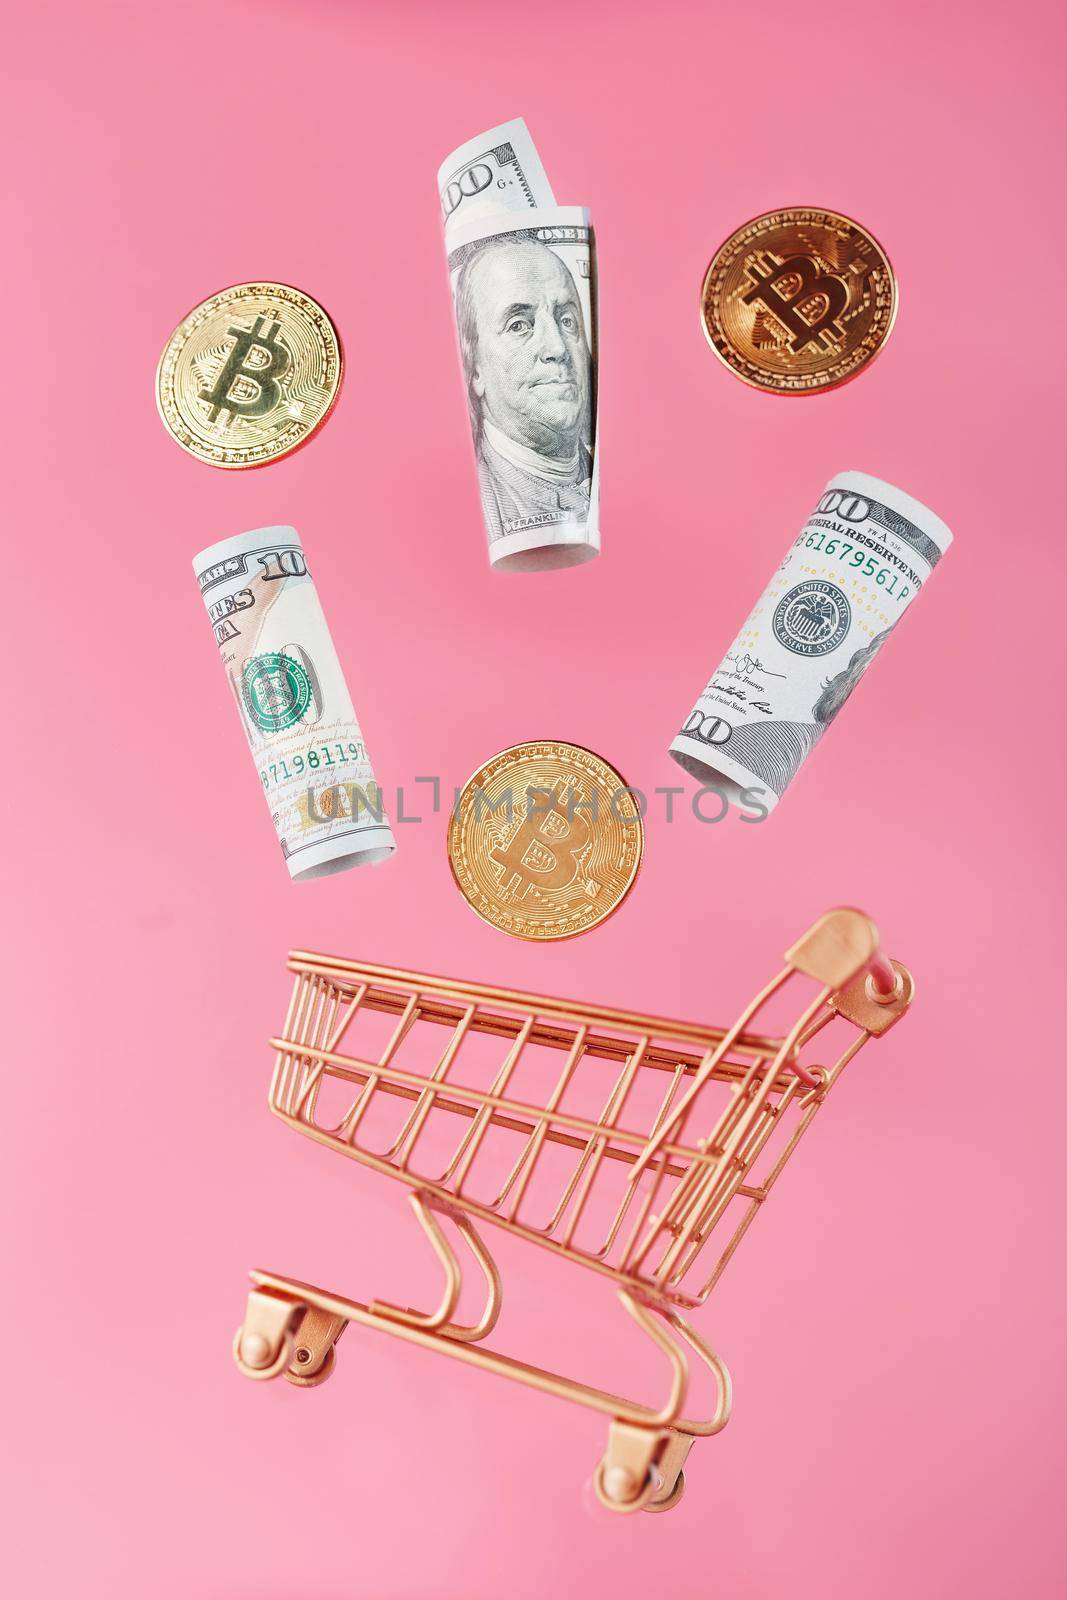 Gold mini cart with bitcoin coins and US dollars in a flight of levitation on a pink background. by AlexGrec